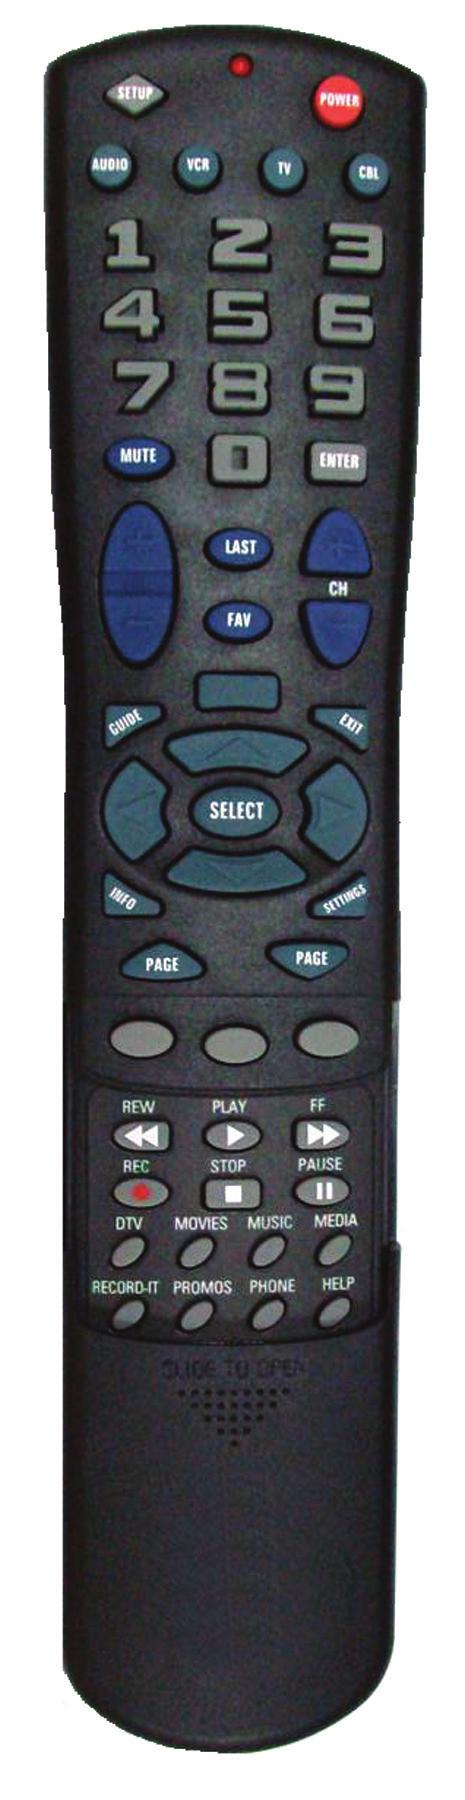 Amino Remote Control Turn TV On/Off Hargray Remote Press TV Press POWER to turn TV On/Off Press CBL, then change channel Numeric Keypad Enter channels or other numeric information at menu prompts